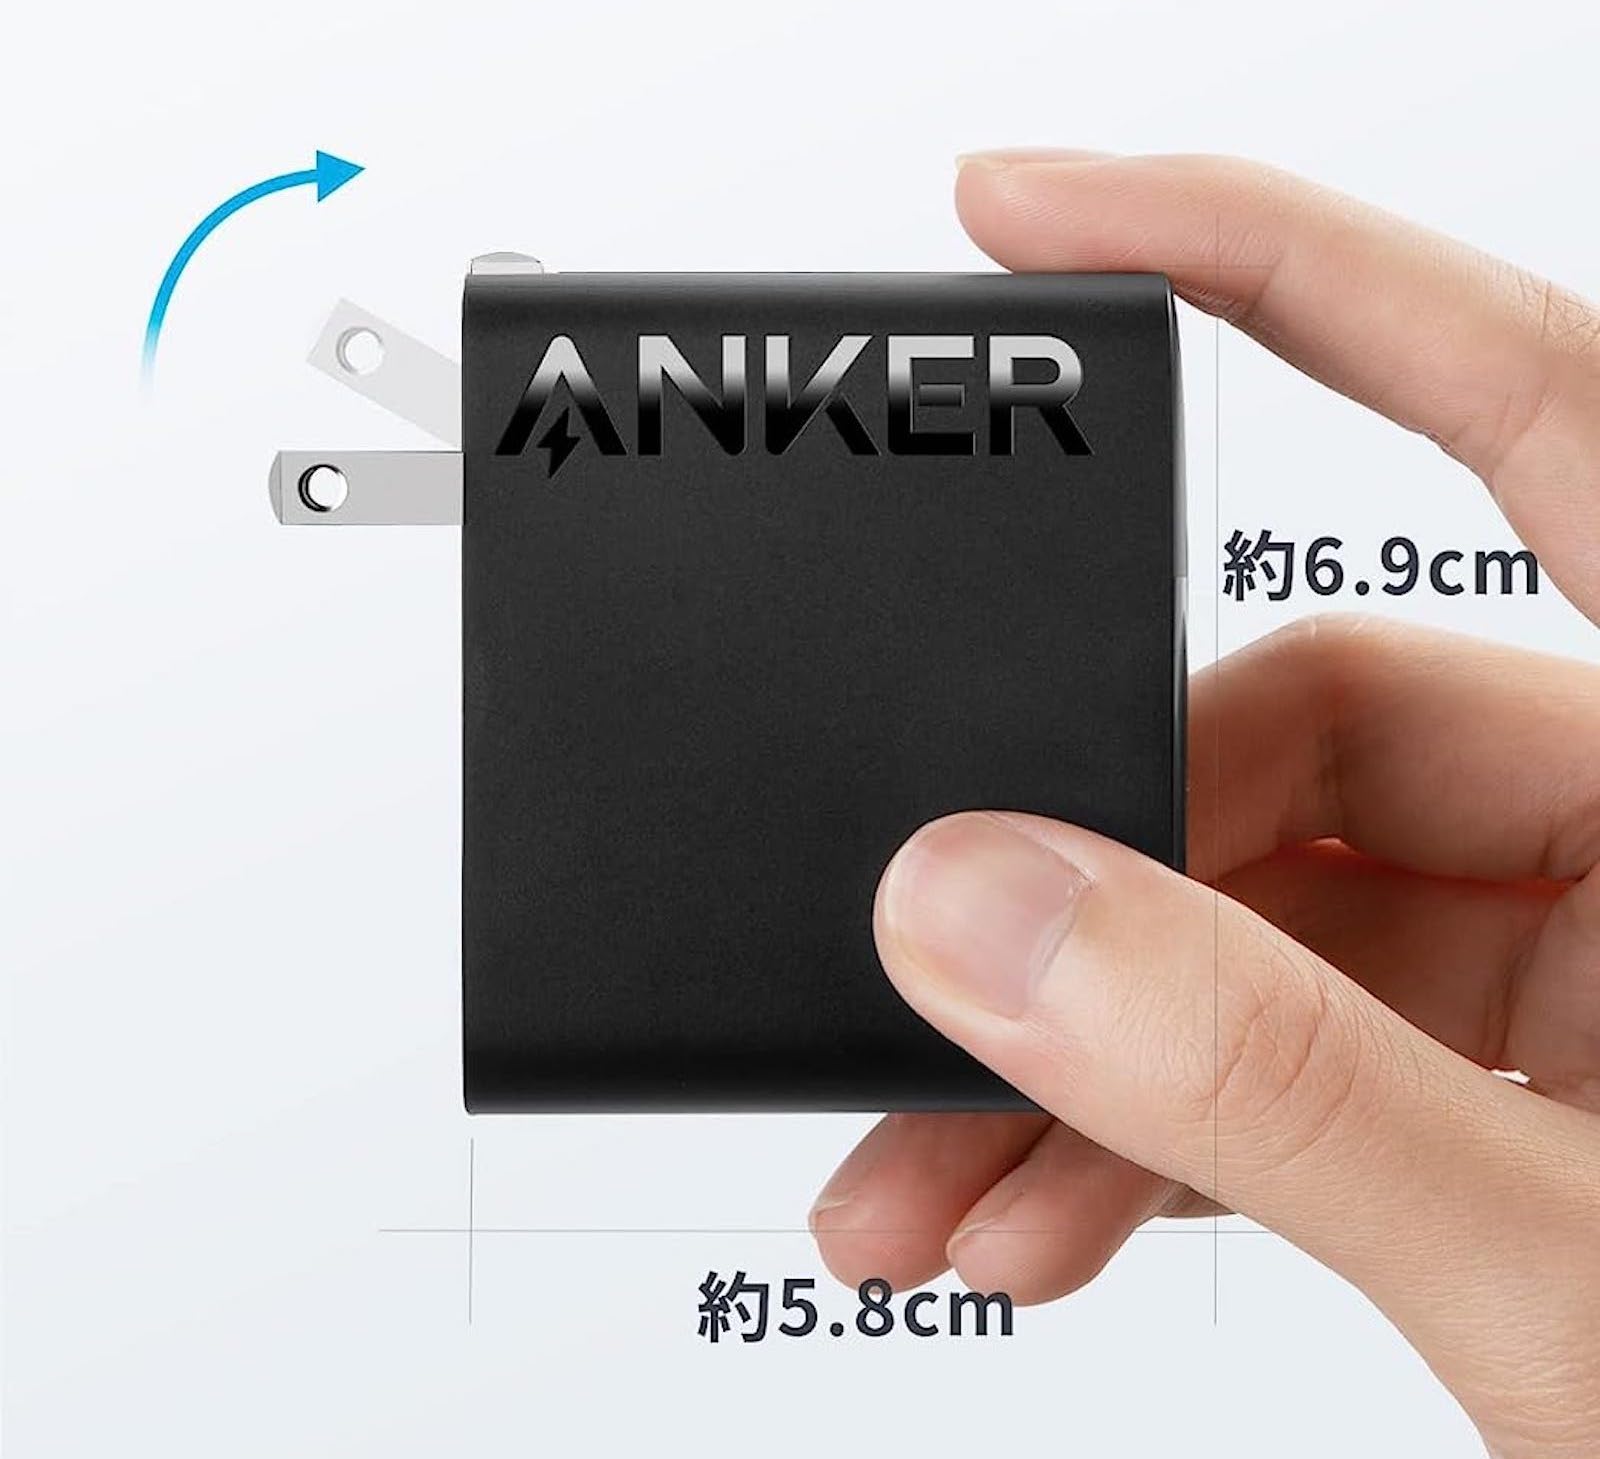 Anker 317 charger 2